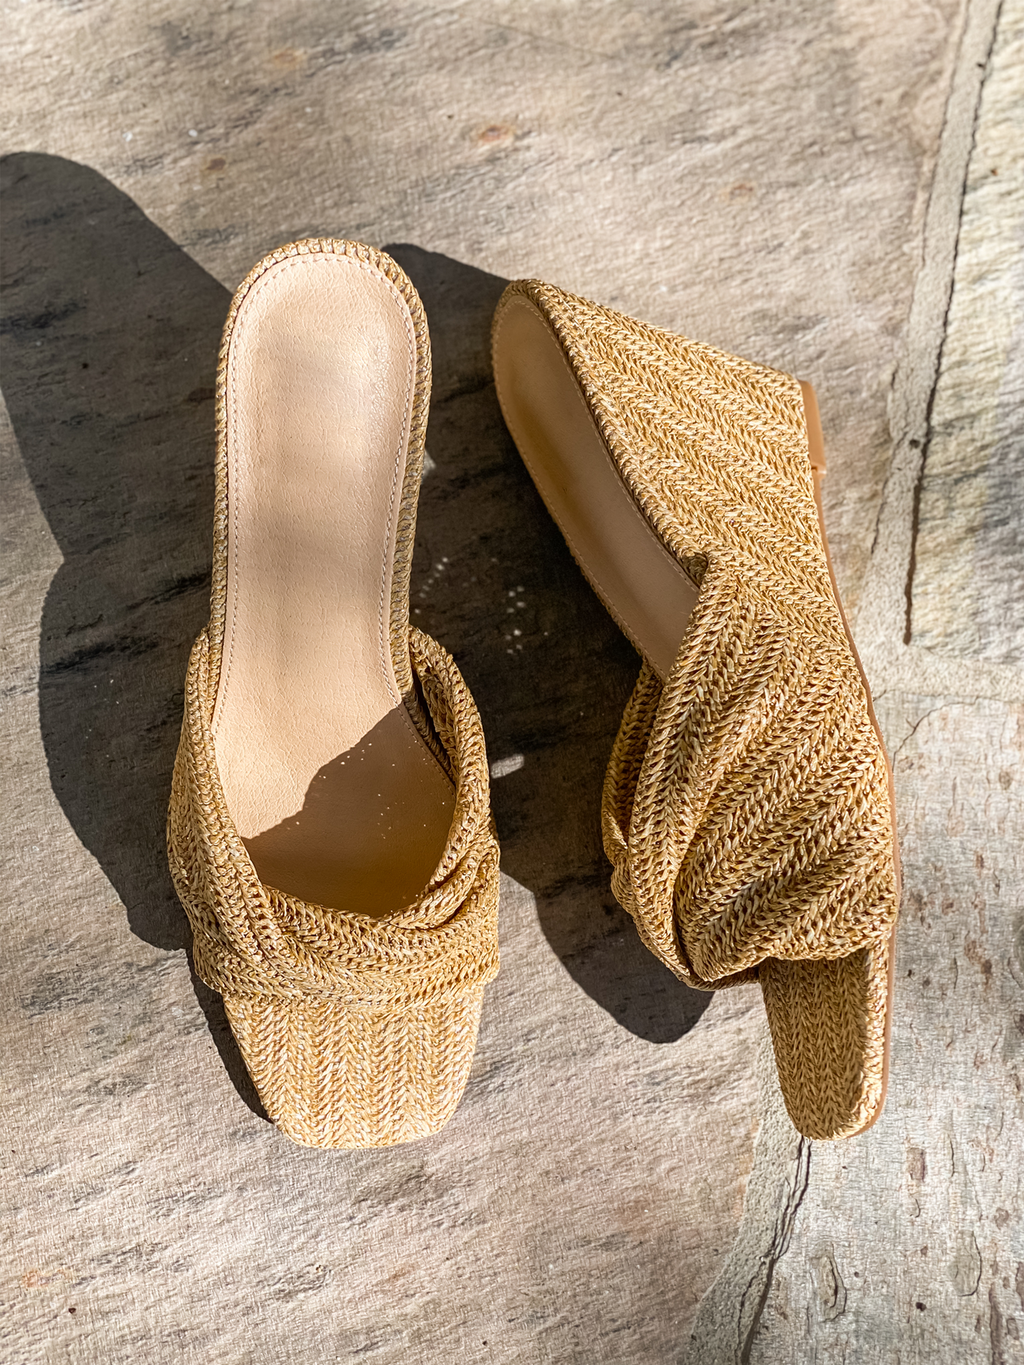 Jovie Wedge Sandals in Camel - Stitch And Feather